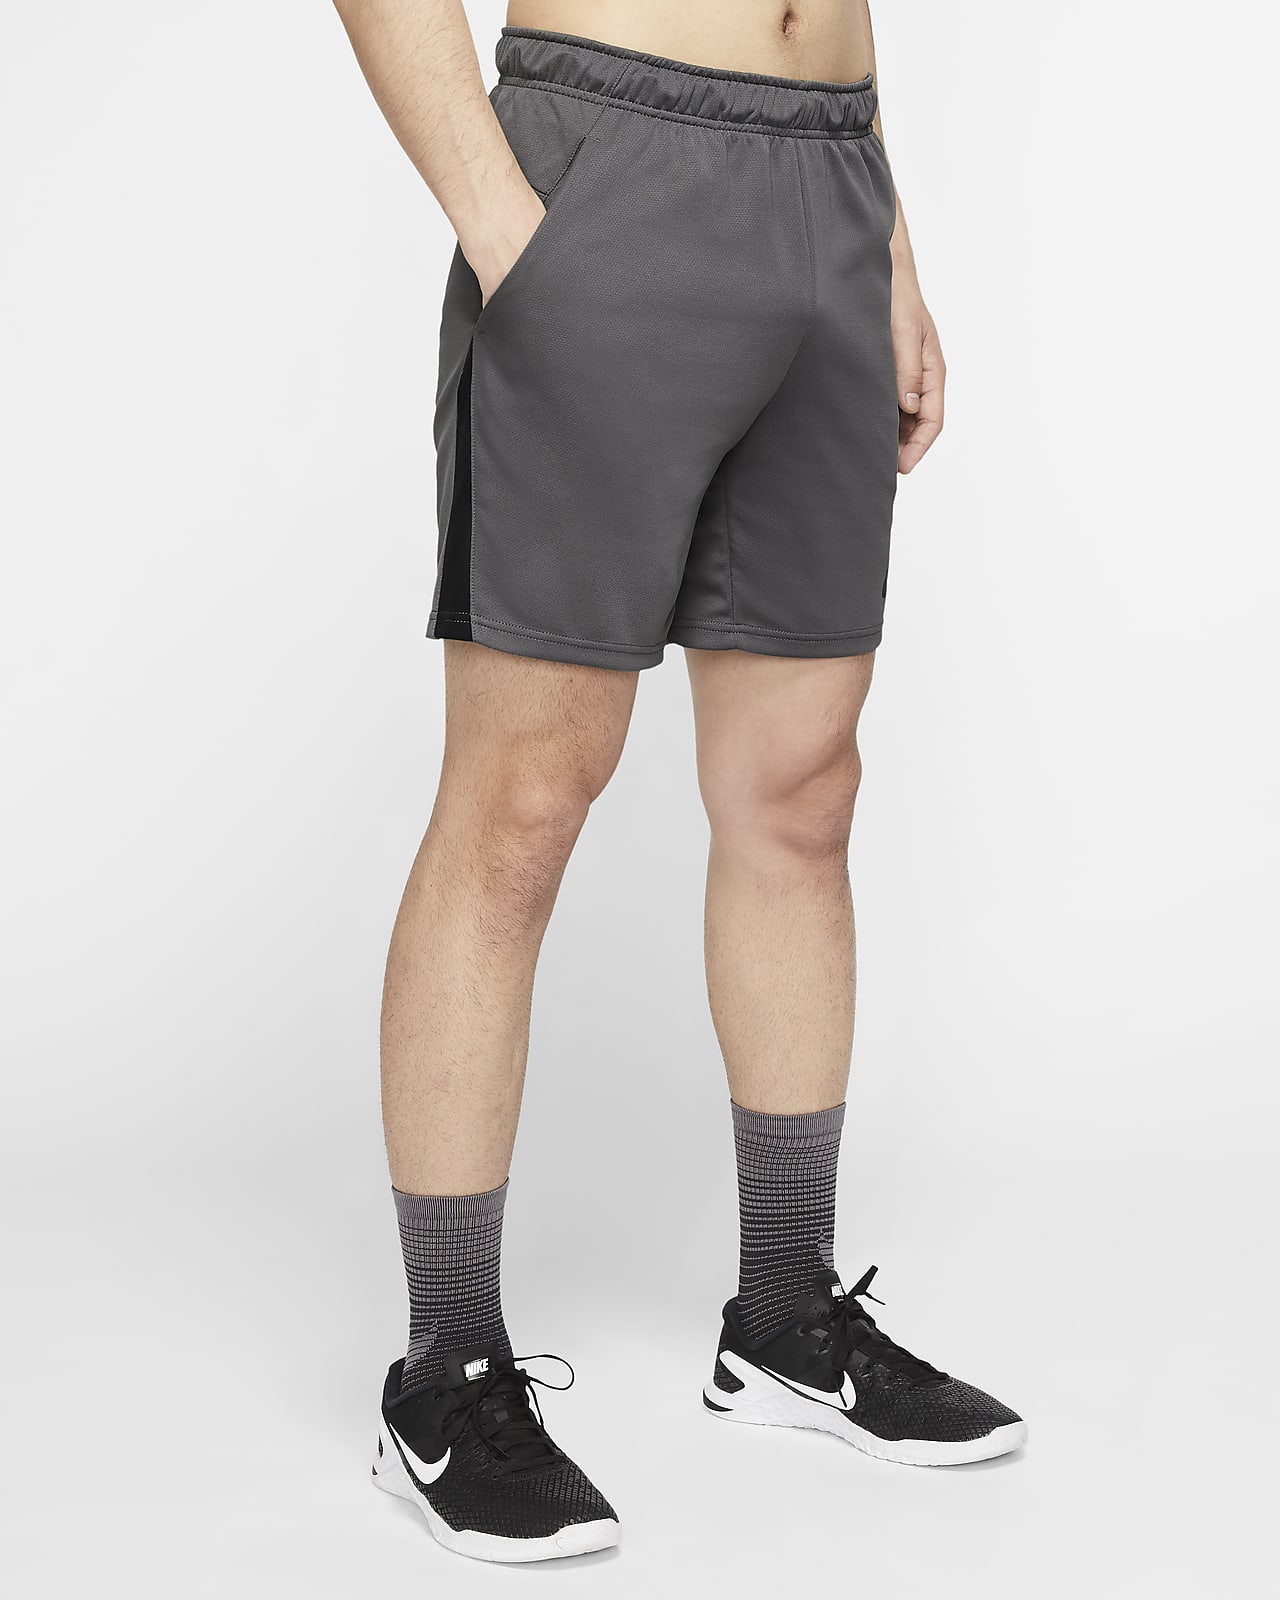 nike dri fit shorts with pockets